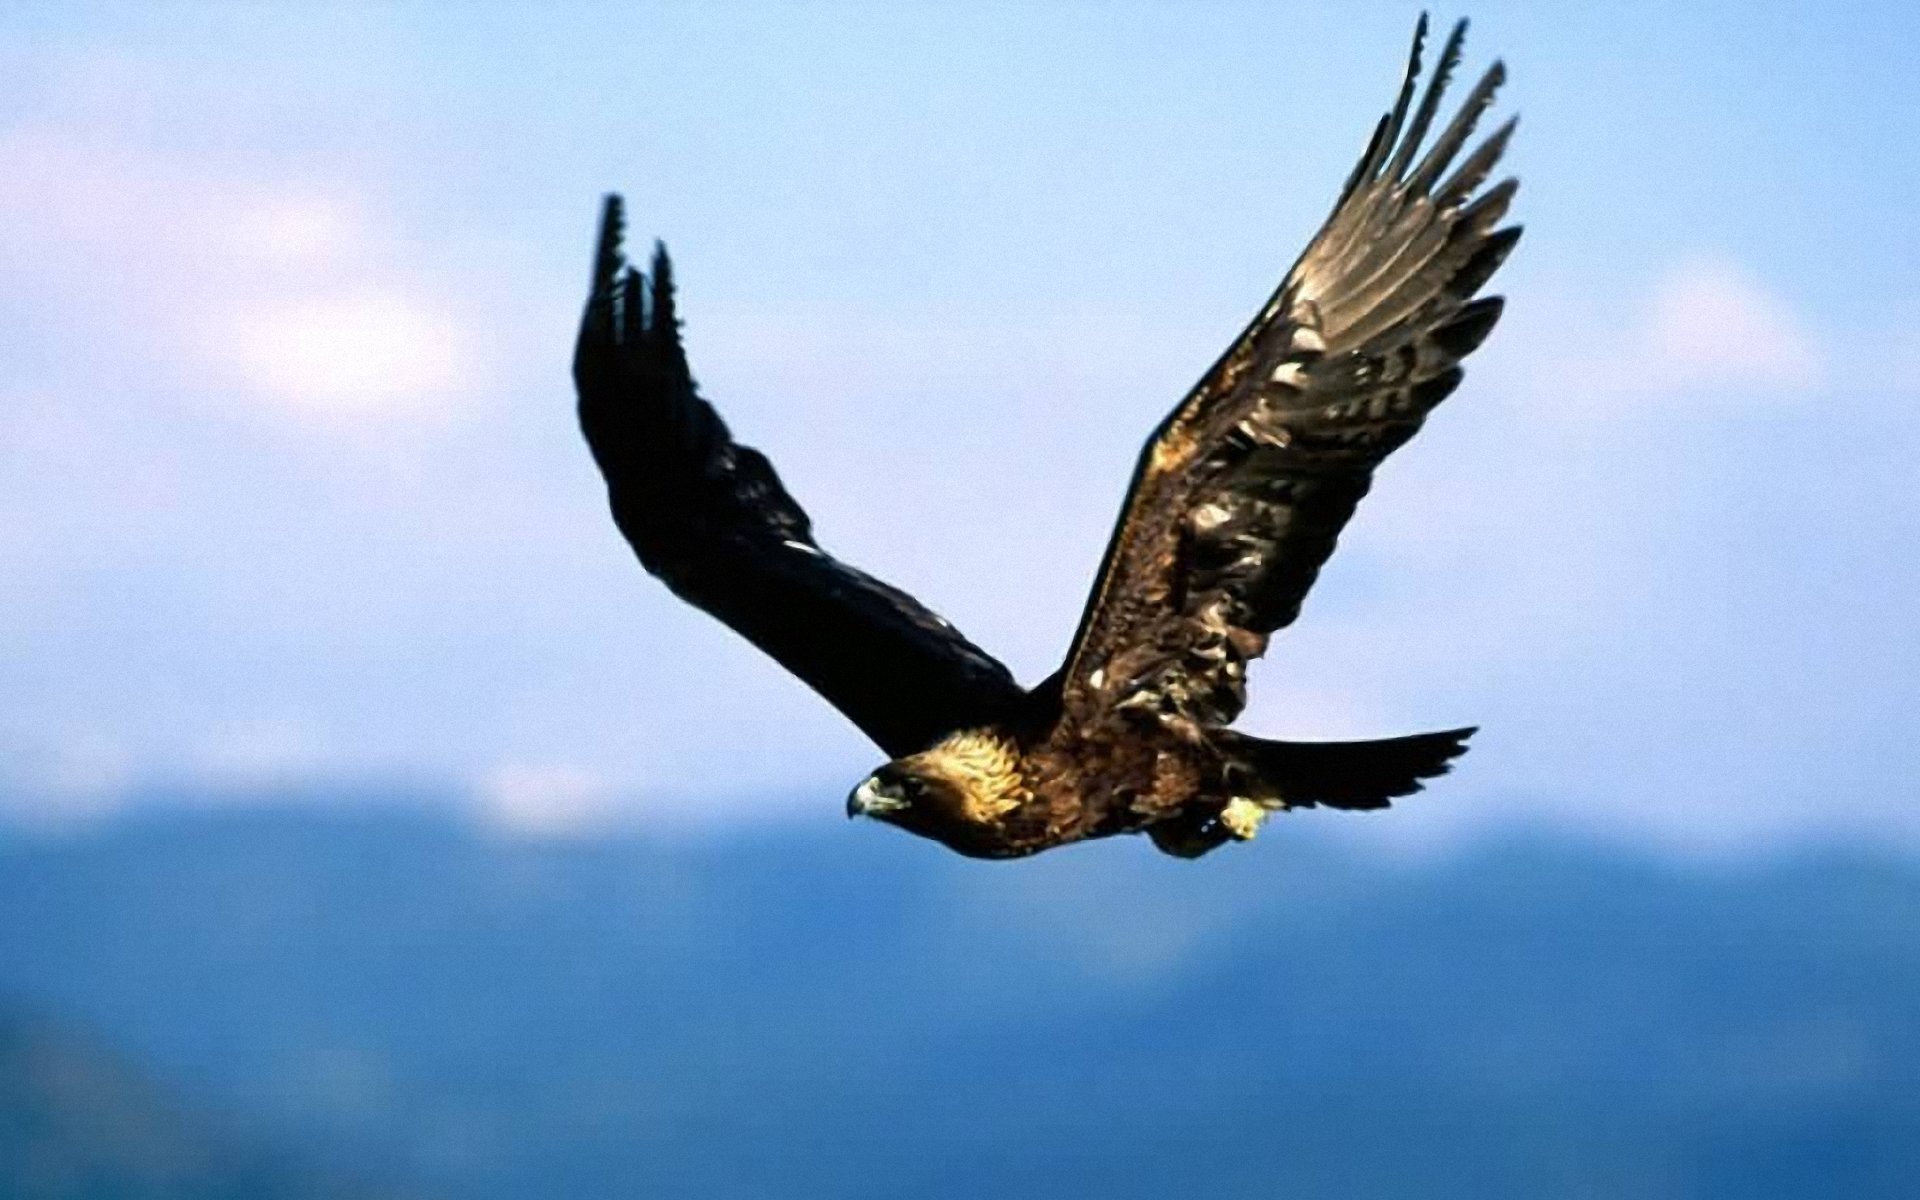 Eagle Flying 1920x1200 WallpapersEagle 1920x1200 Wallpapers